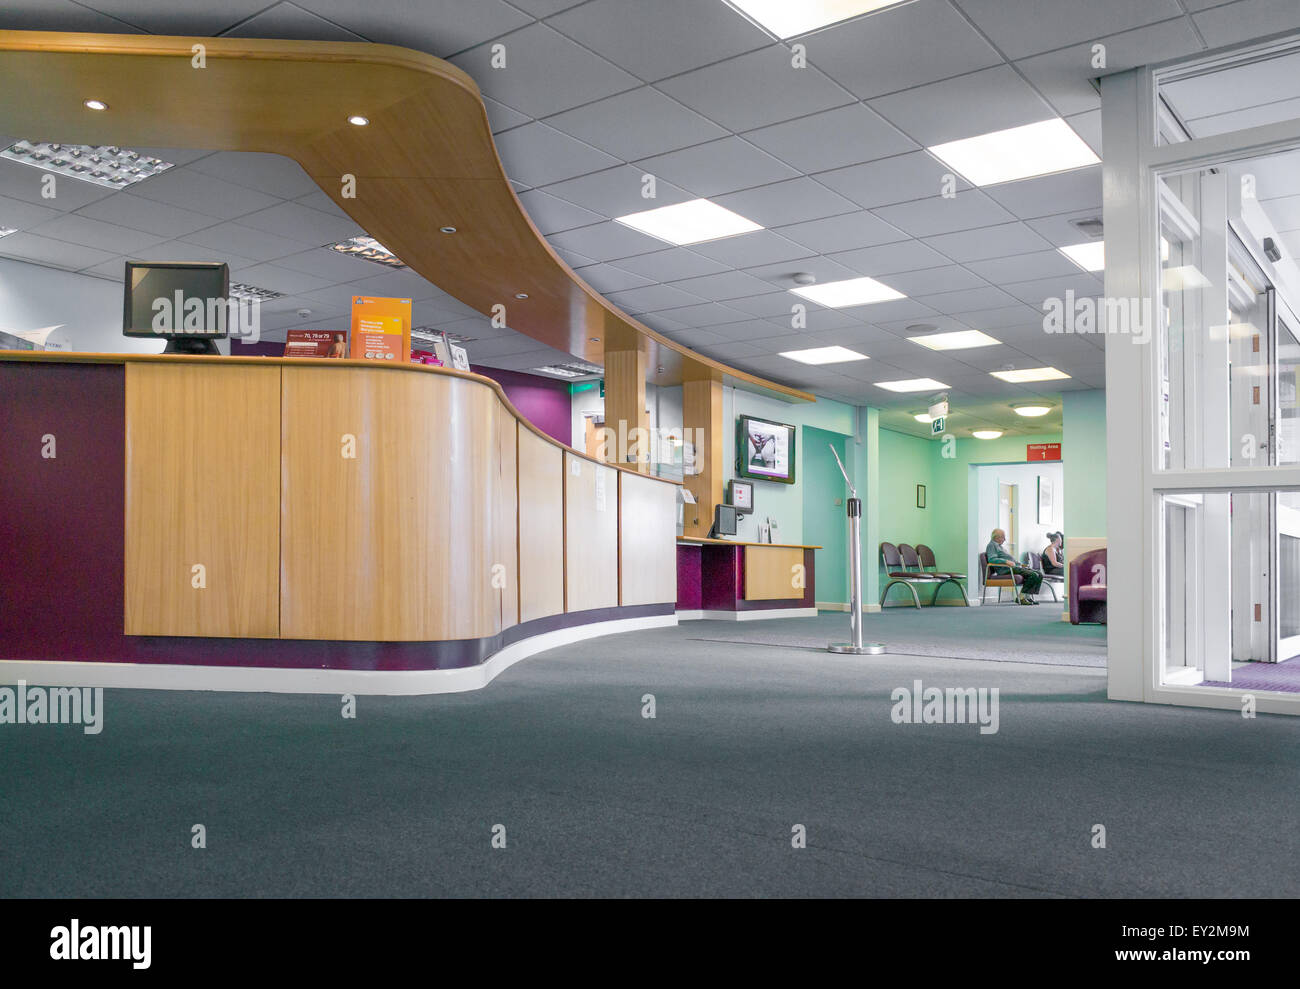 Entrance Foyer At The Forest Gate Branch Of The Lakeside Surgery General Practice Corby England Stock Photo Alamy